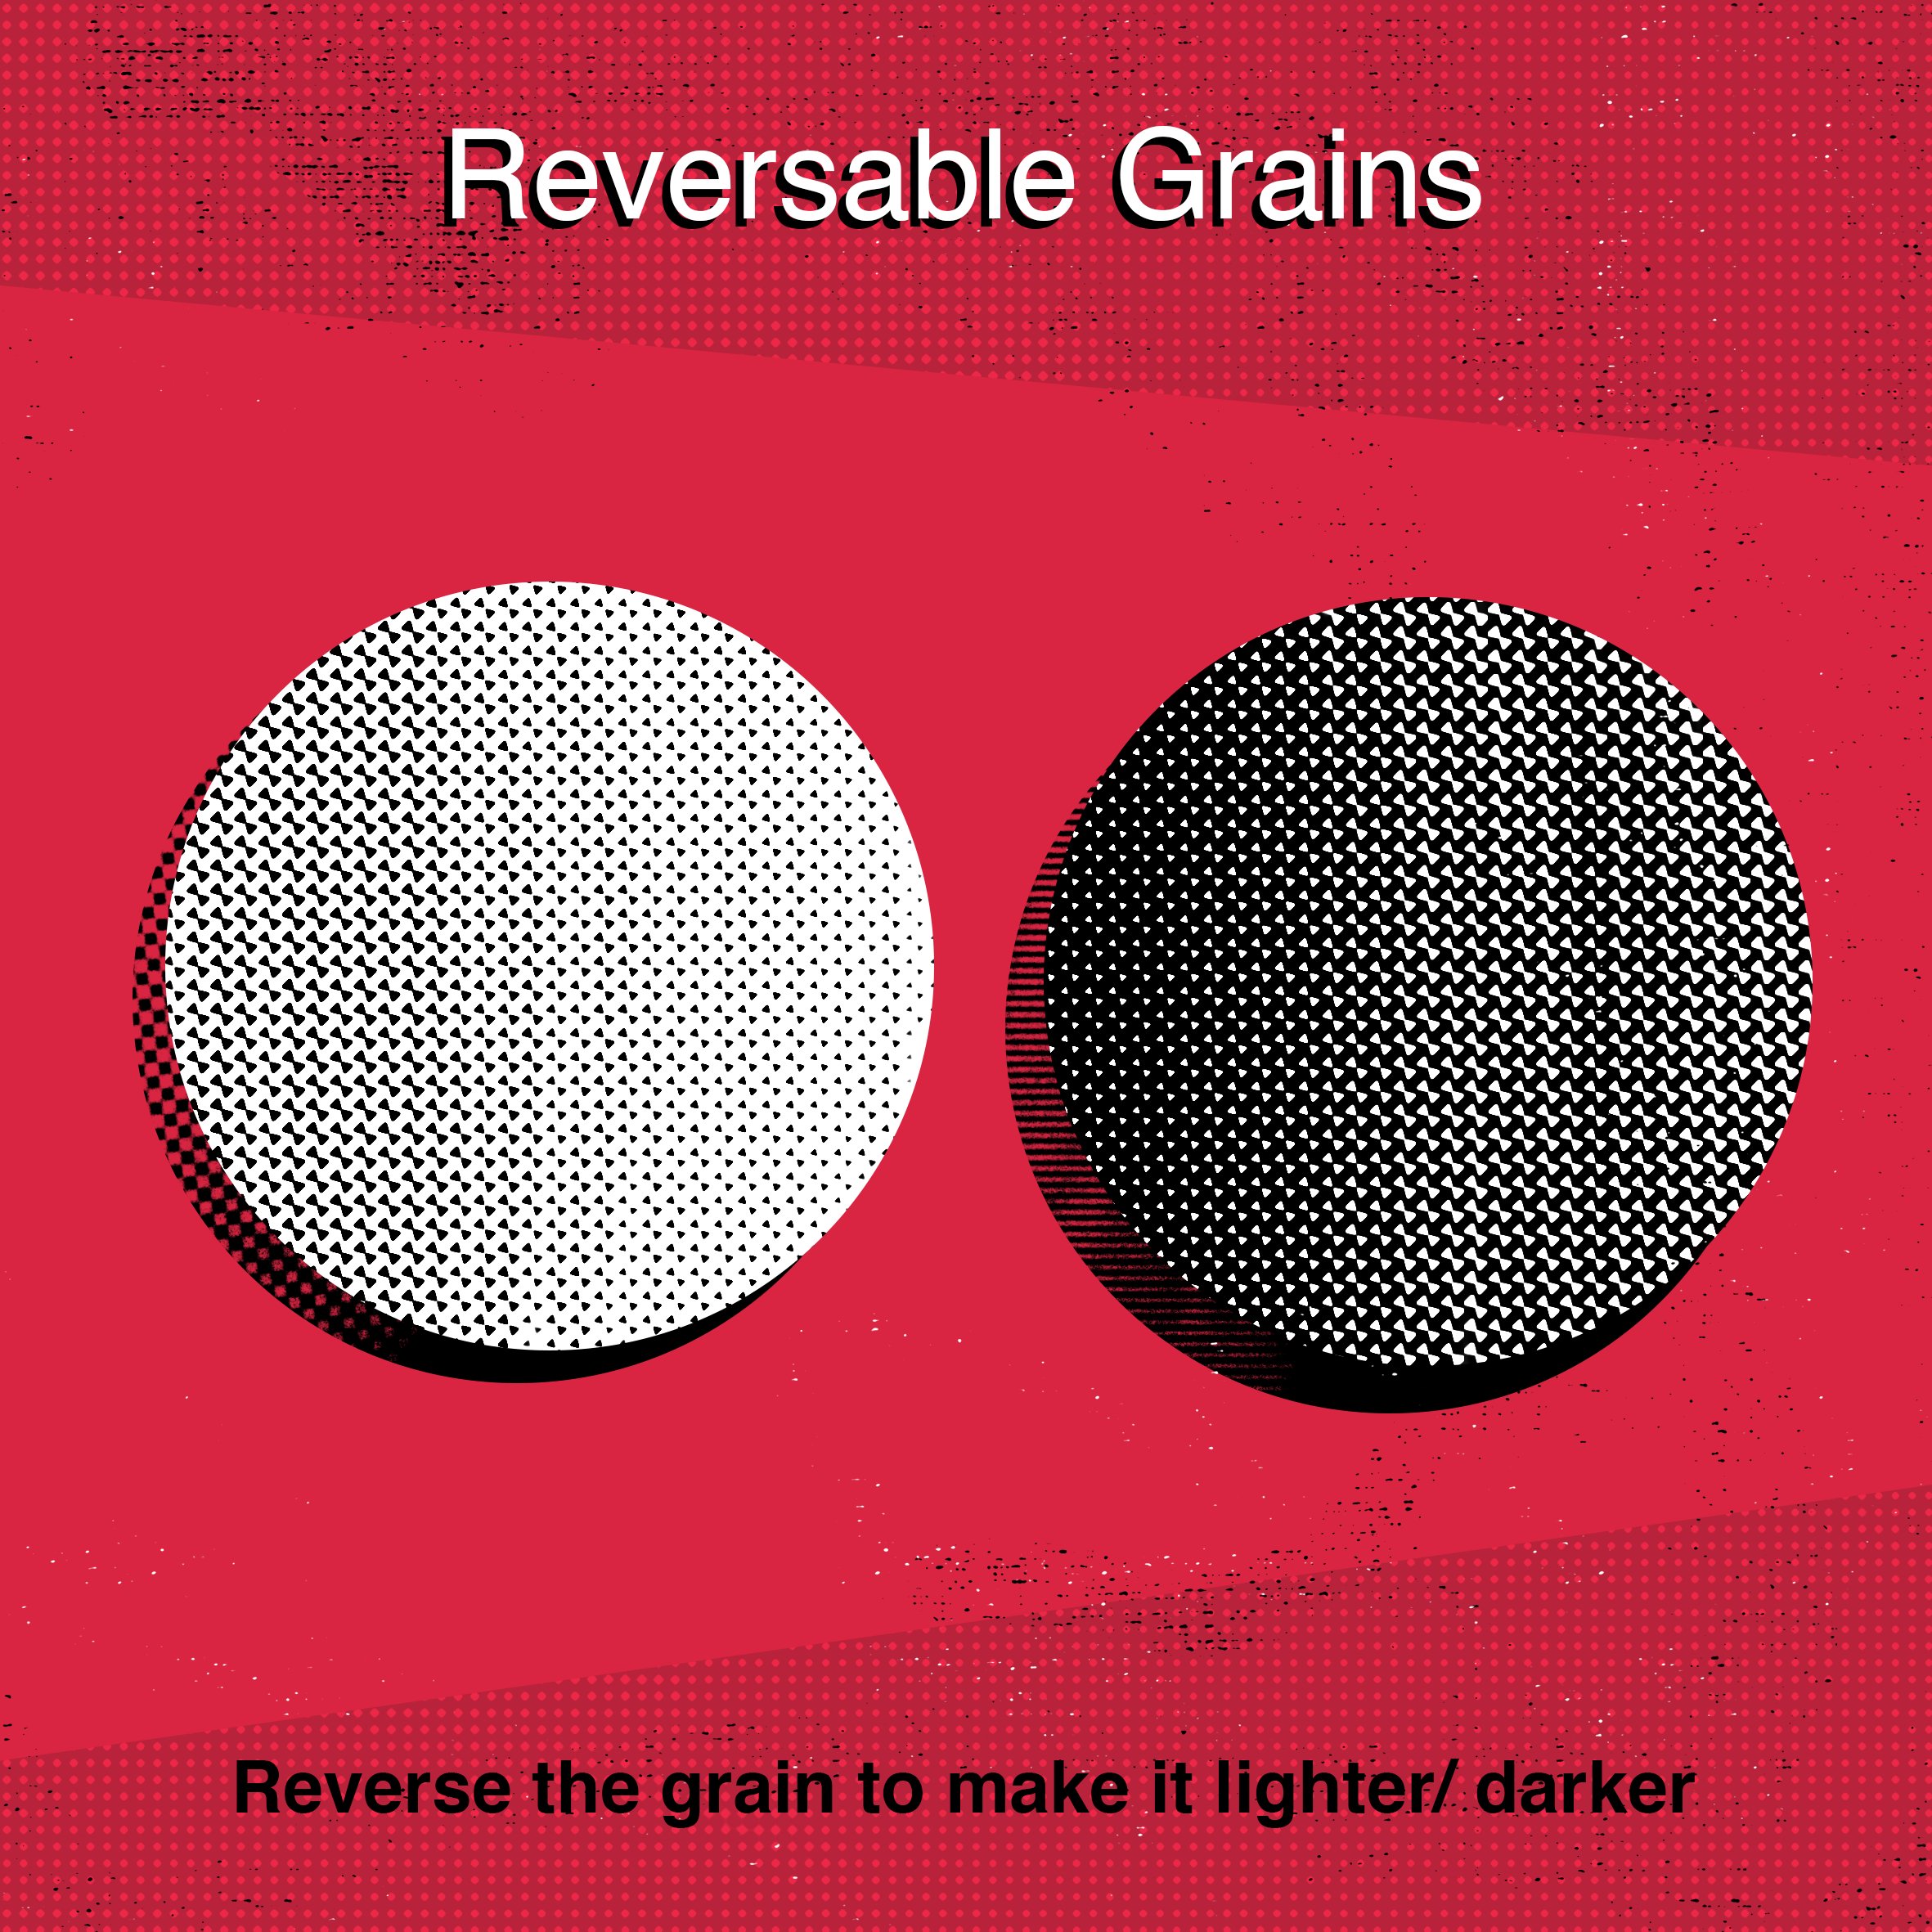 Two rounds with reversable grains.